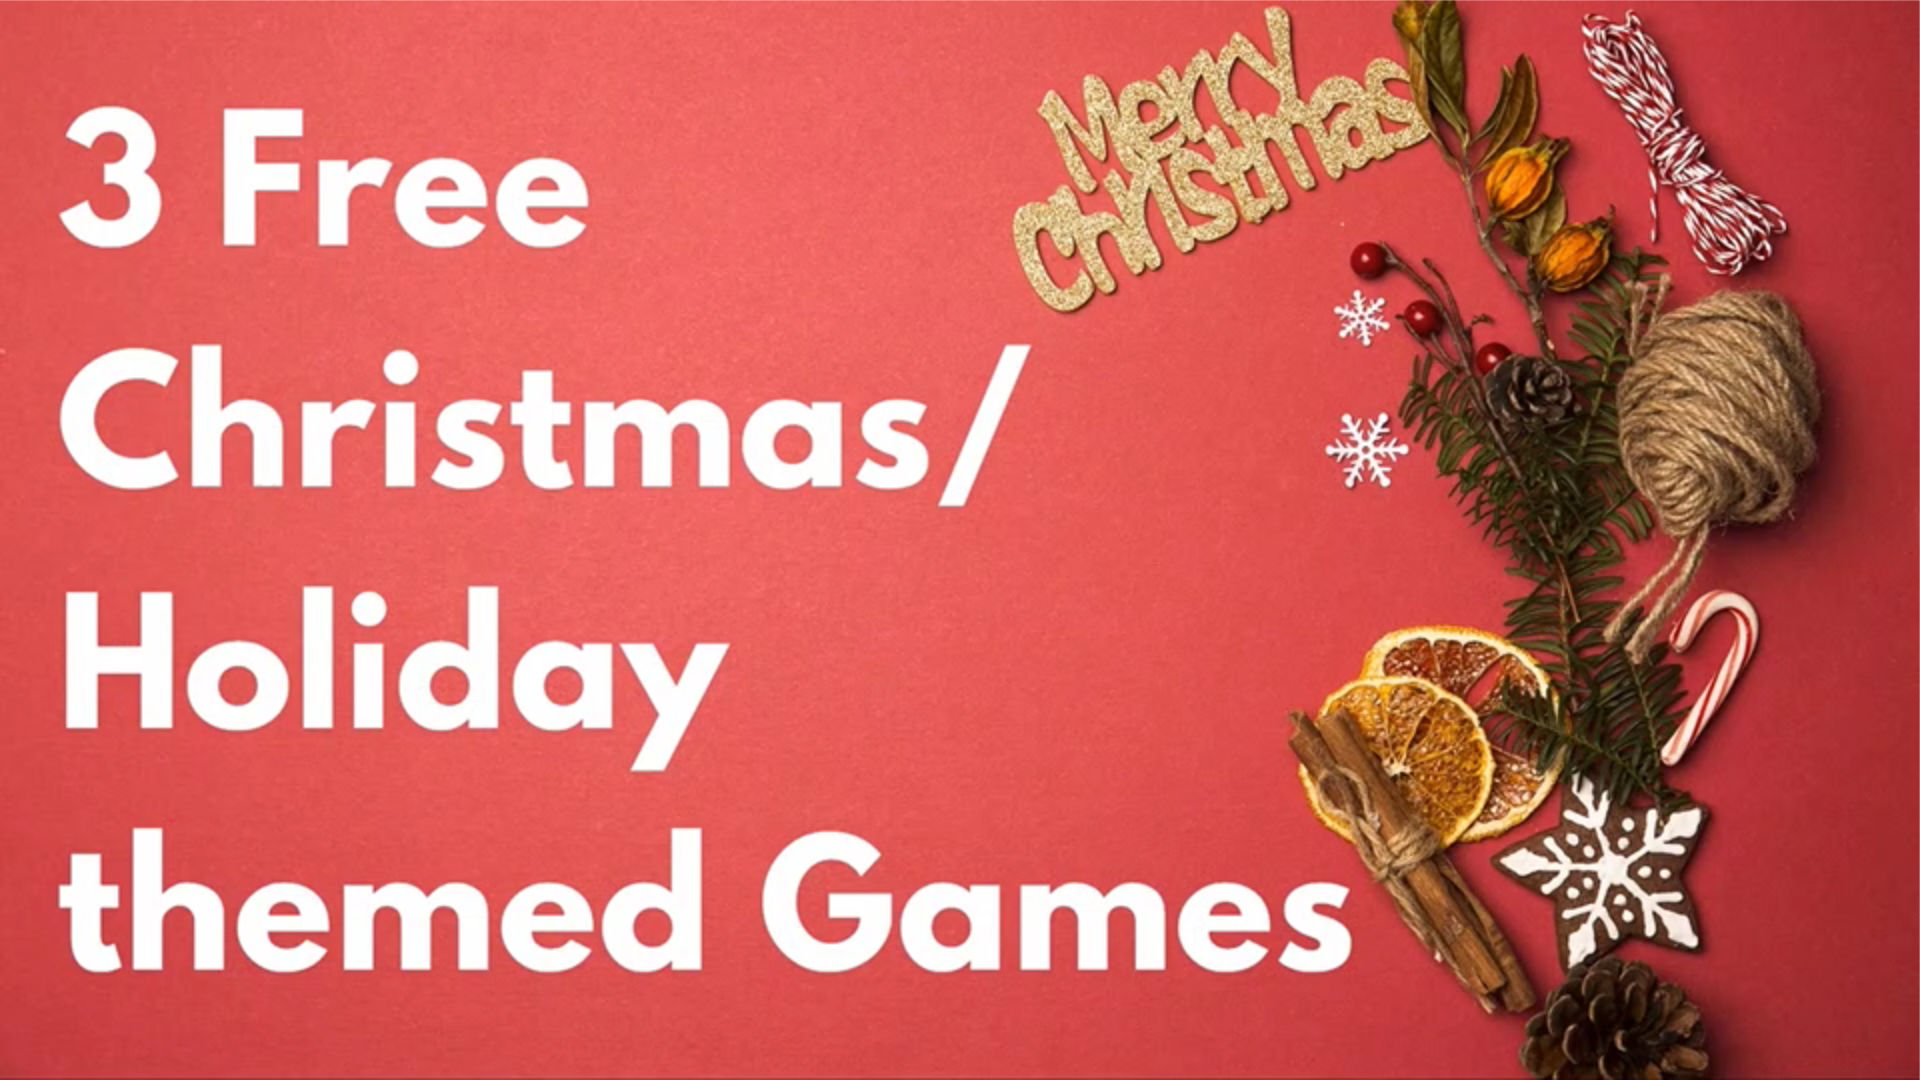 3 Free Christmas Games & Holiday-themed Games to Play Online